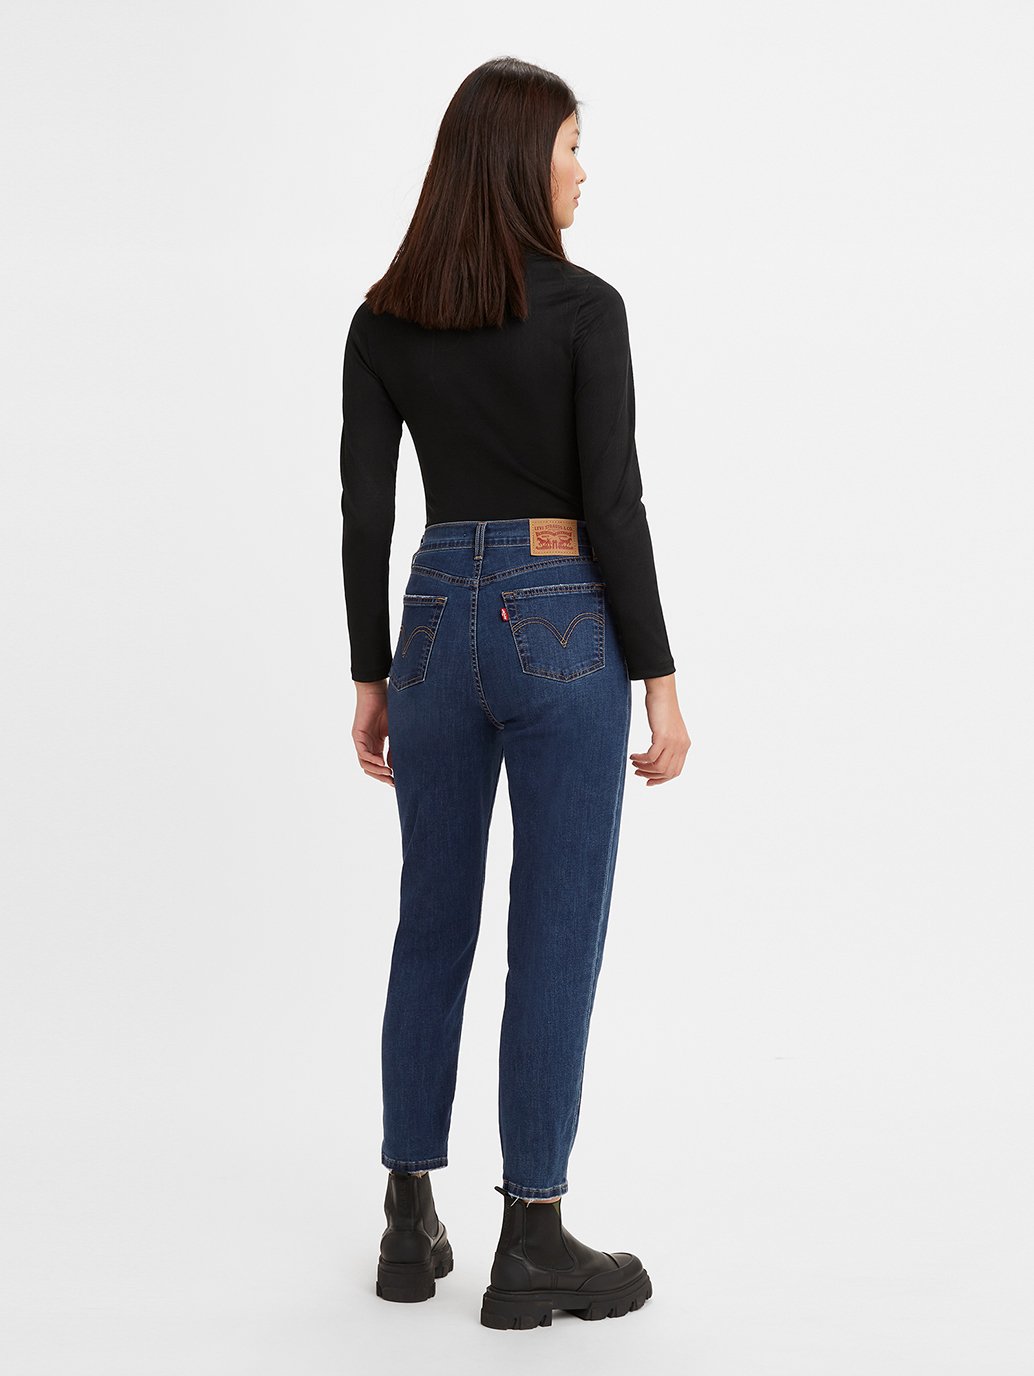 Women Jeans - Buy Jeans for Women Online in India | Myntra-saigonsouth.com.vn